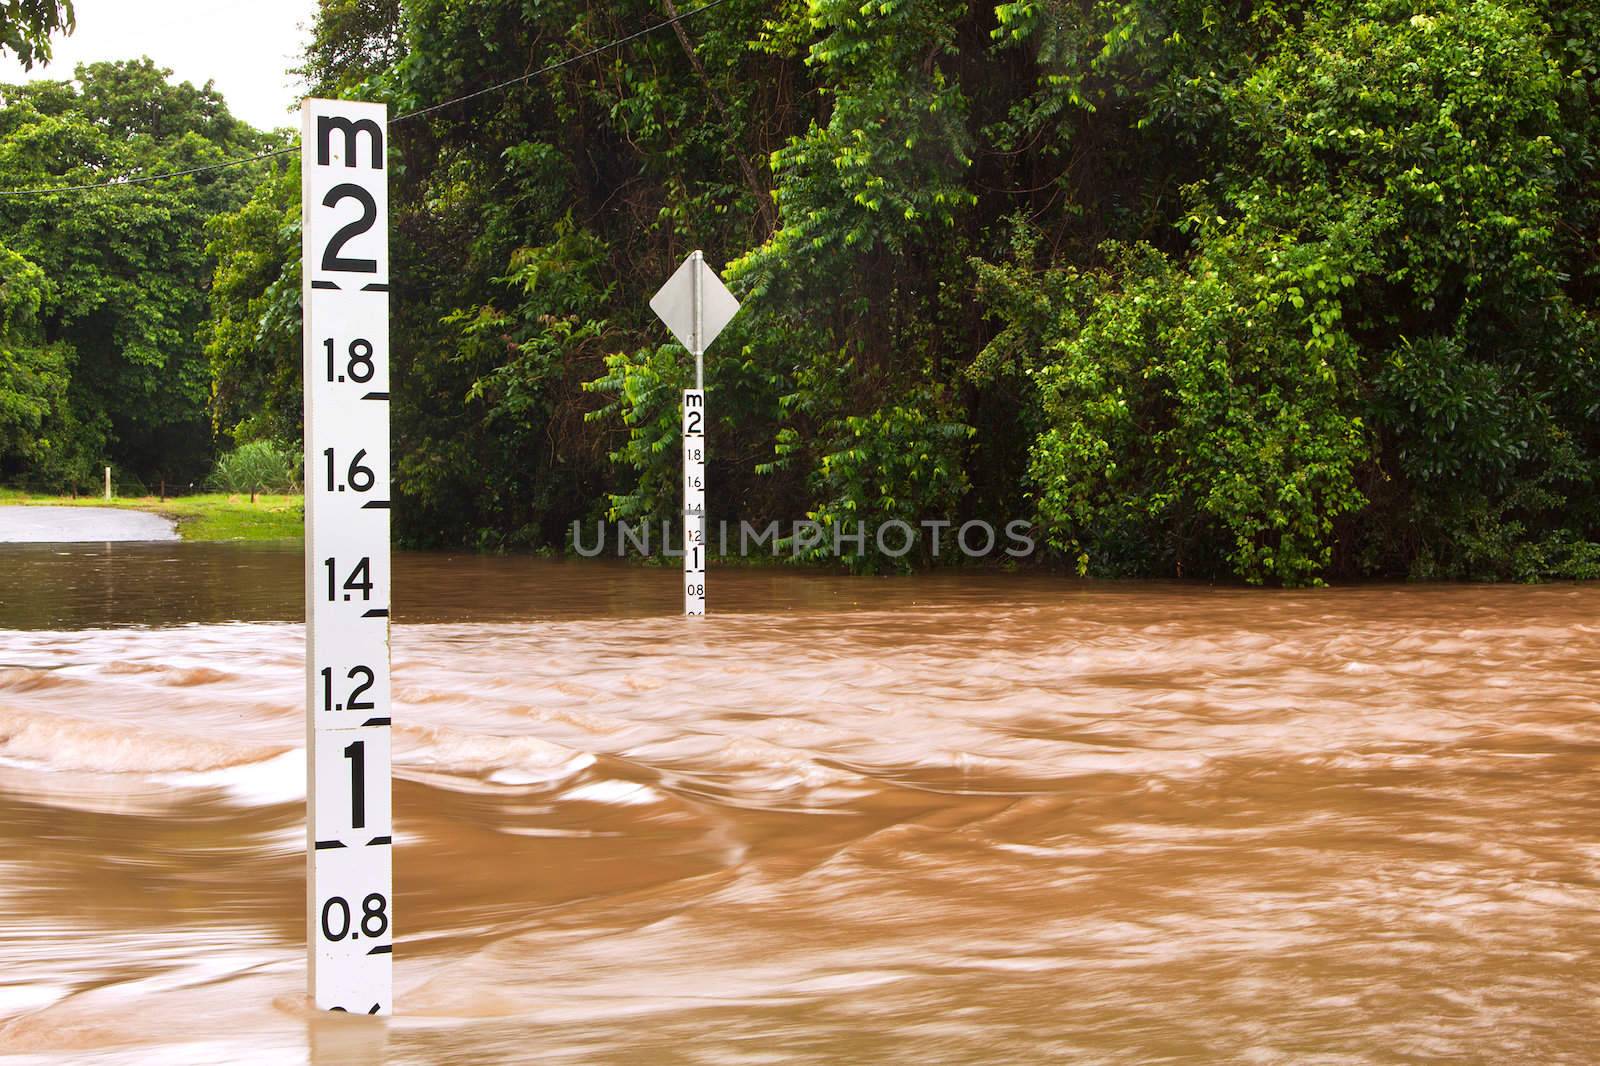 Flooded road with depth indicators in Queensland, Australia by Jaykayl